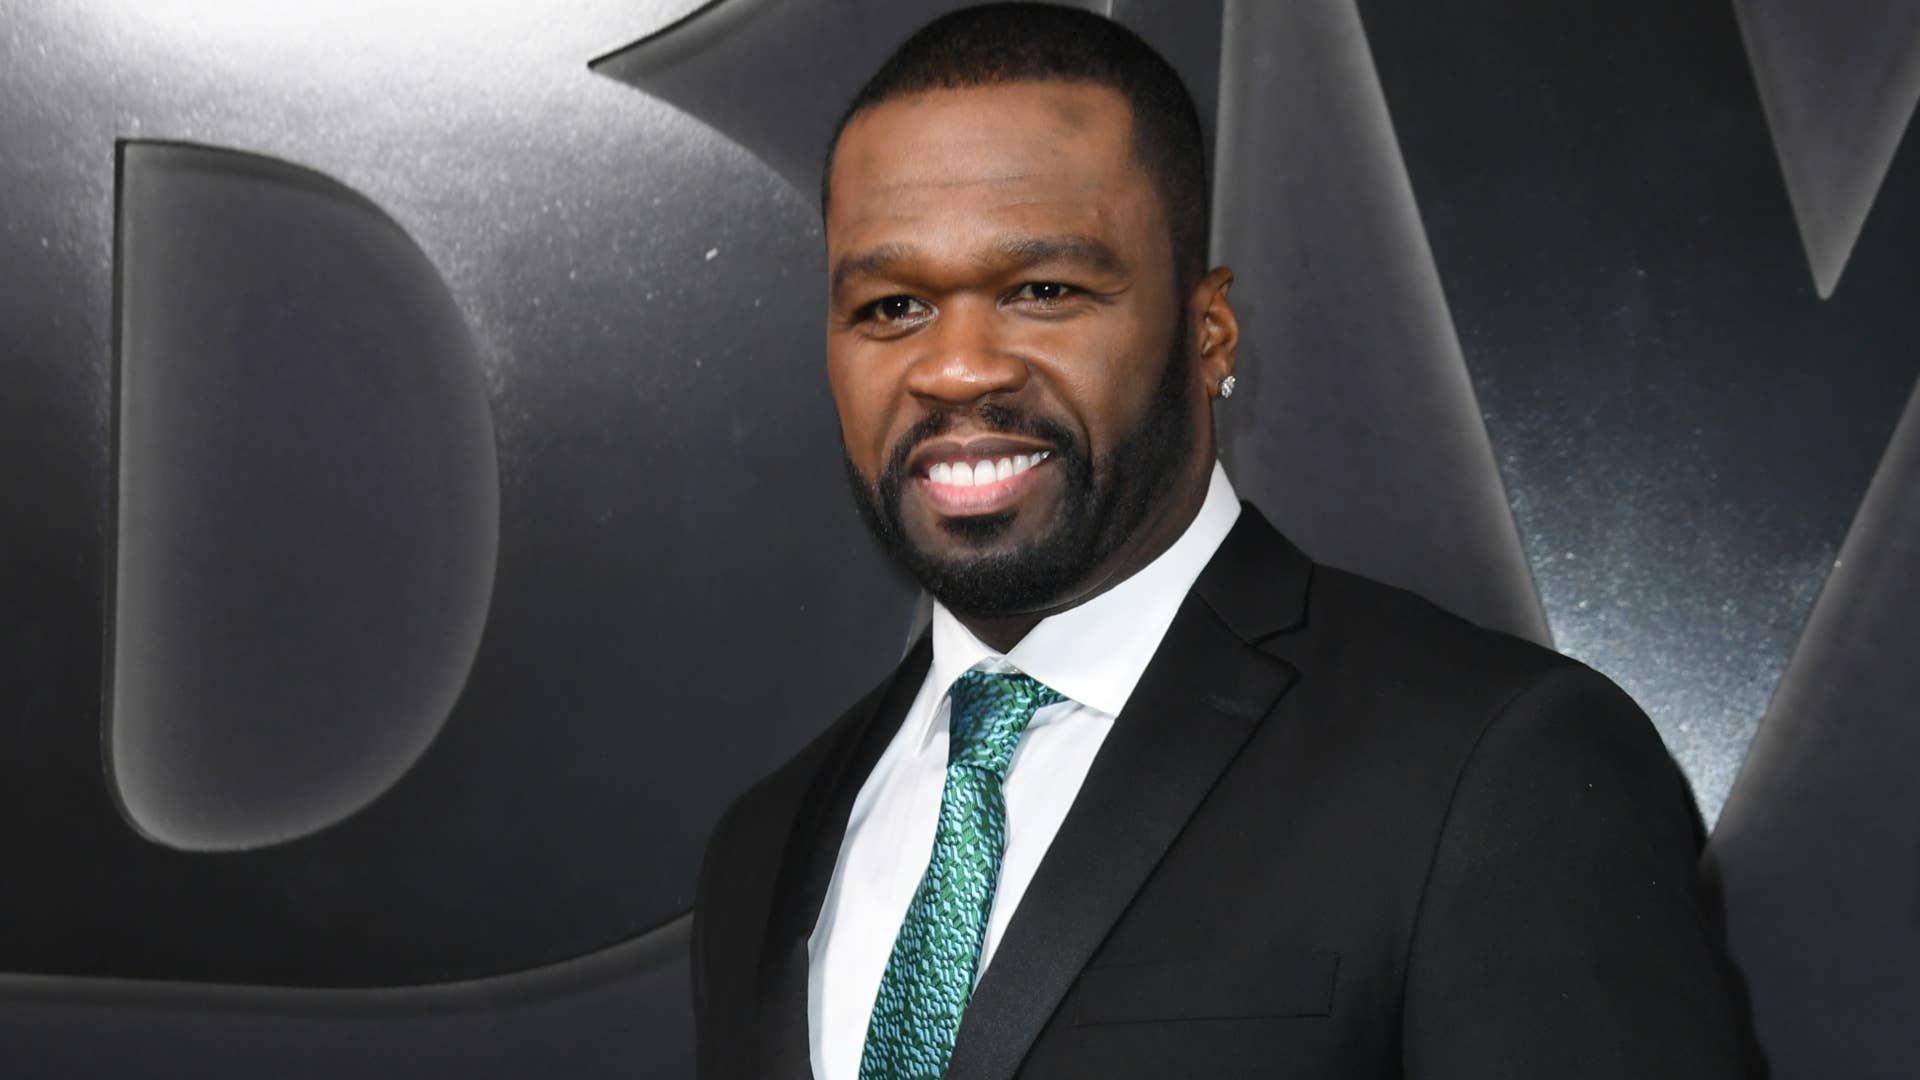 50 Cent pictured at a red carpet event